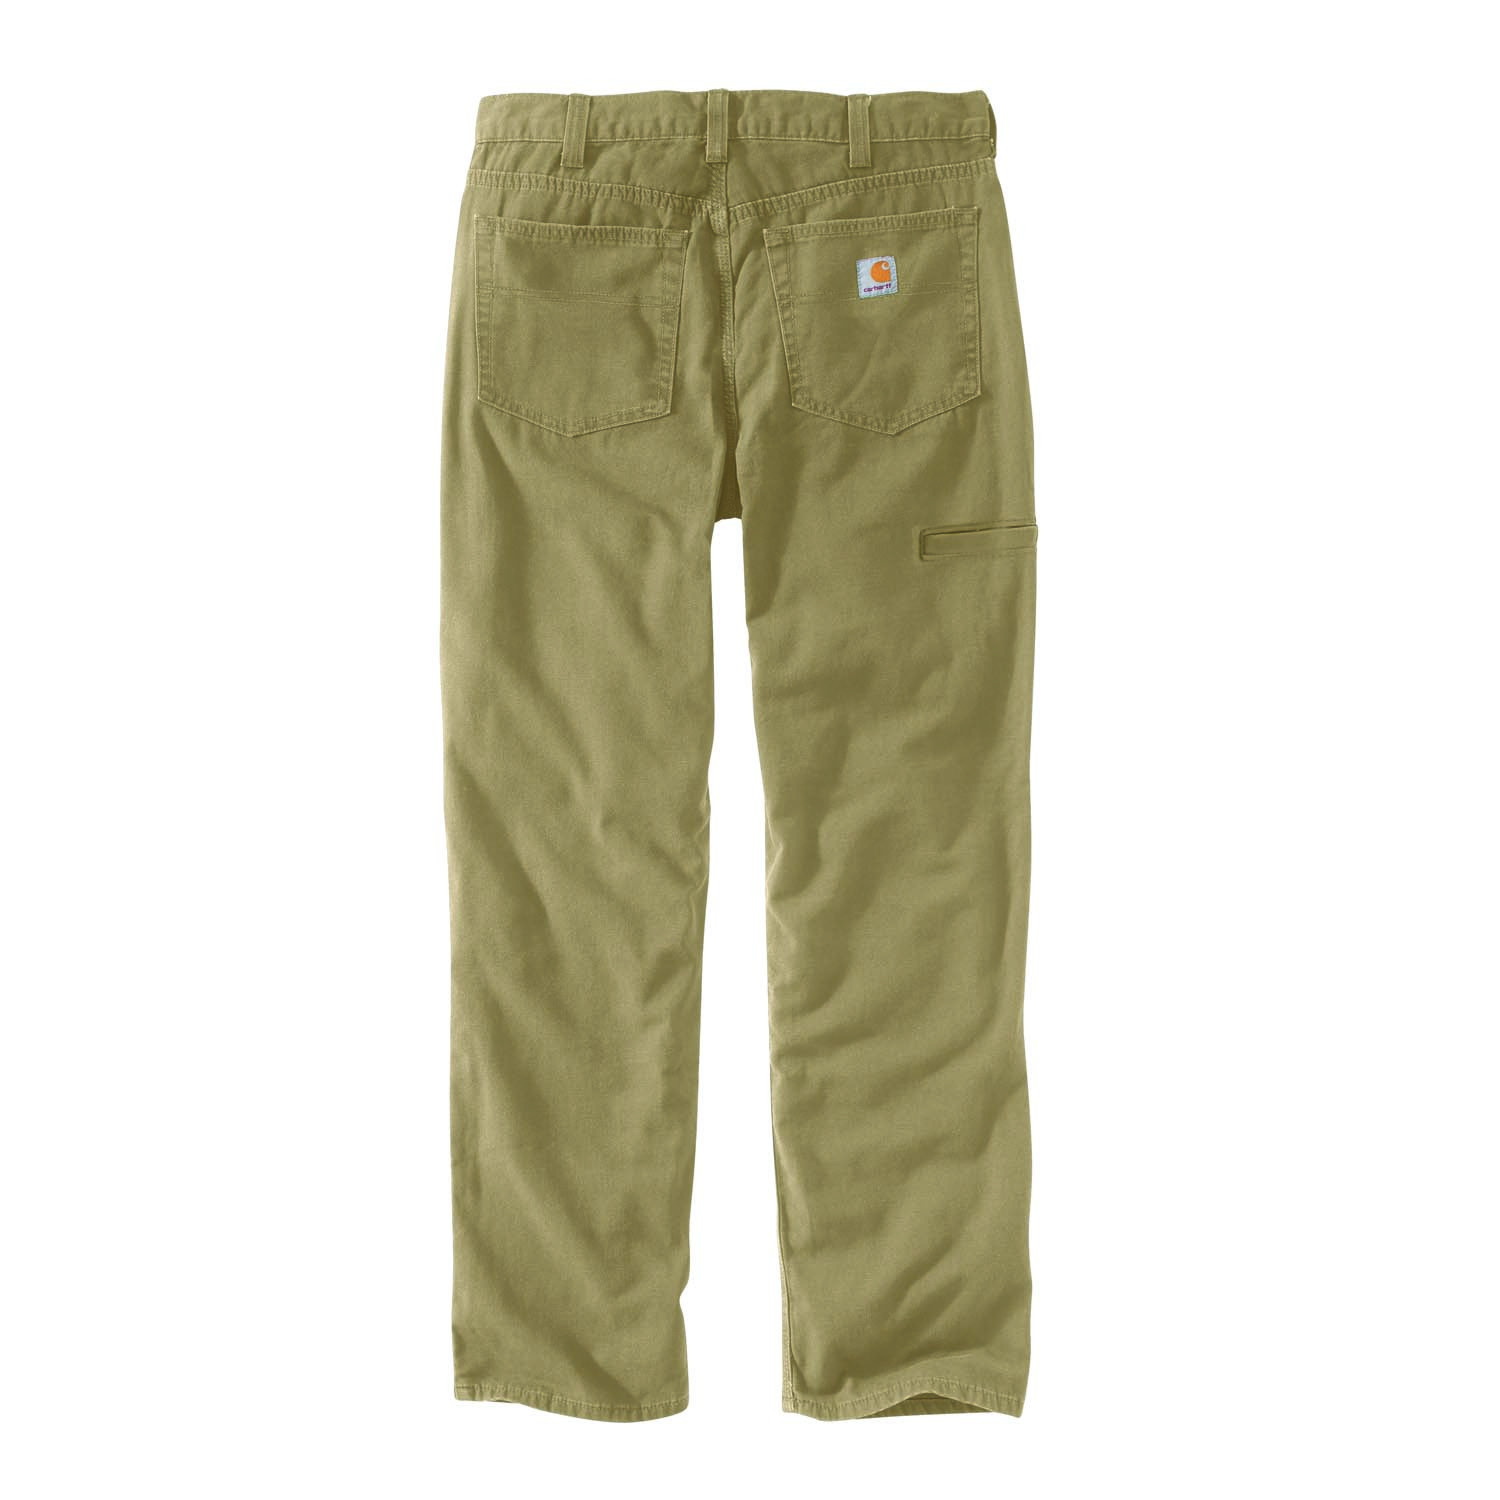 CARHARTT RUGGED FLEX RELAXED FIT CANVAS 5-POCKET WORK PANTS